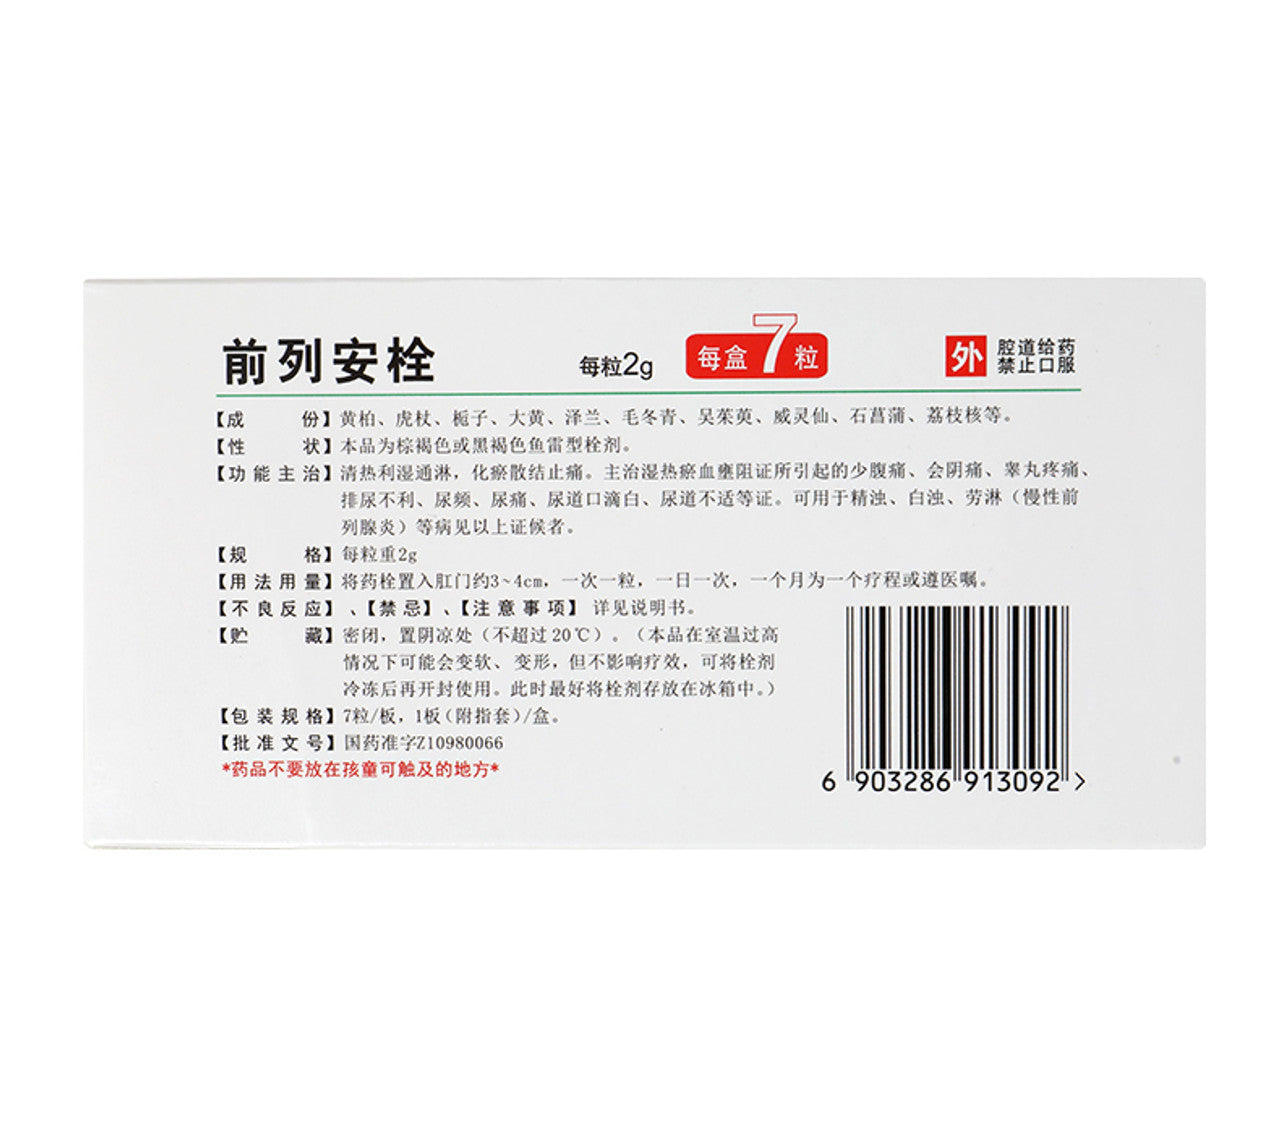 Herbal Suppository. External Use. Brand Lizhu. Qianlieanshuan / Qianlie Anshuan / Qian Lie An Shuan / Qian Lie An Suppository / QianLieAnShuan